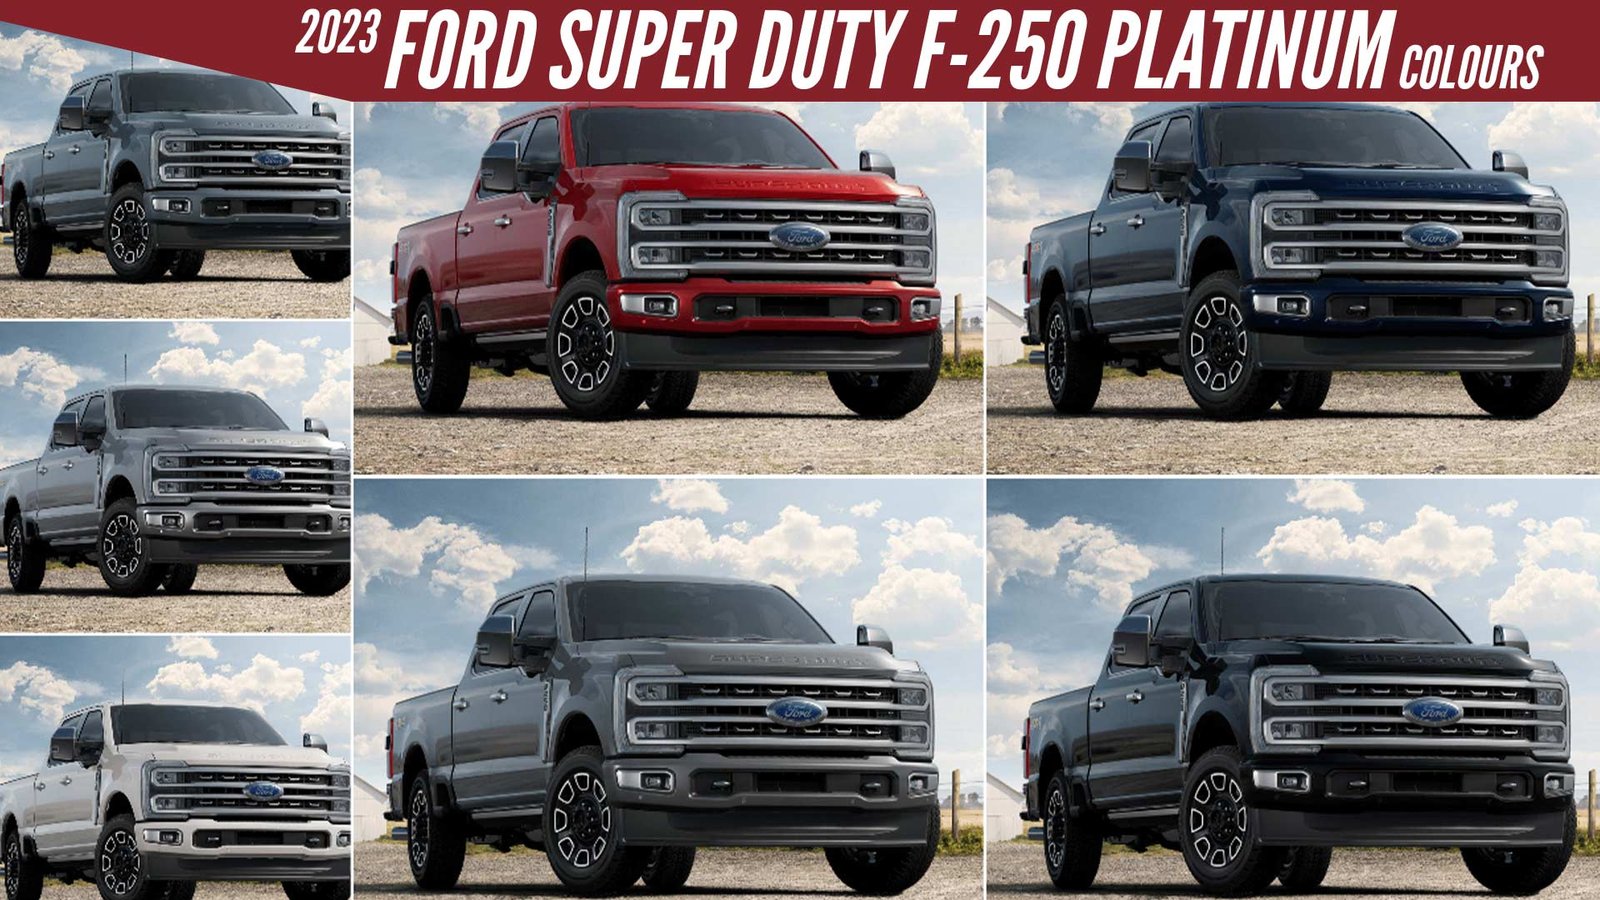 2023 Ford Super Duty F-250 Platinum Truck - All Color Options - Images